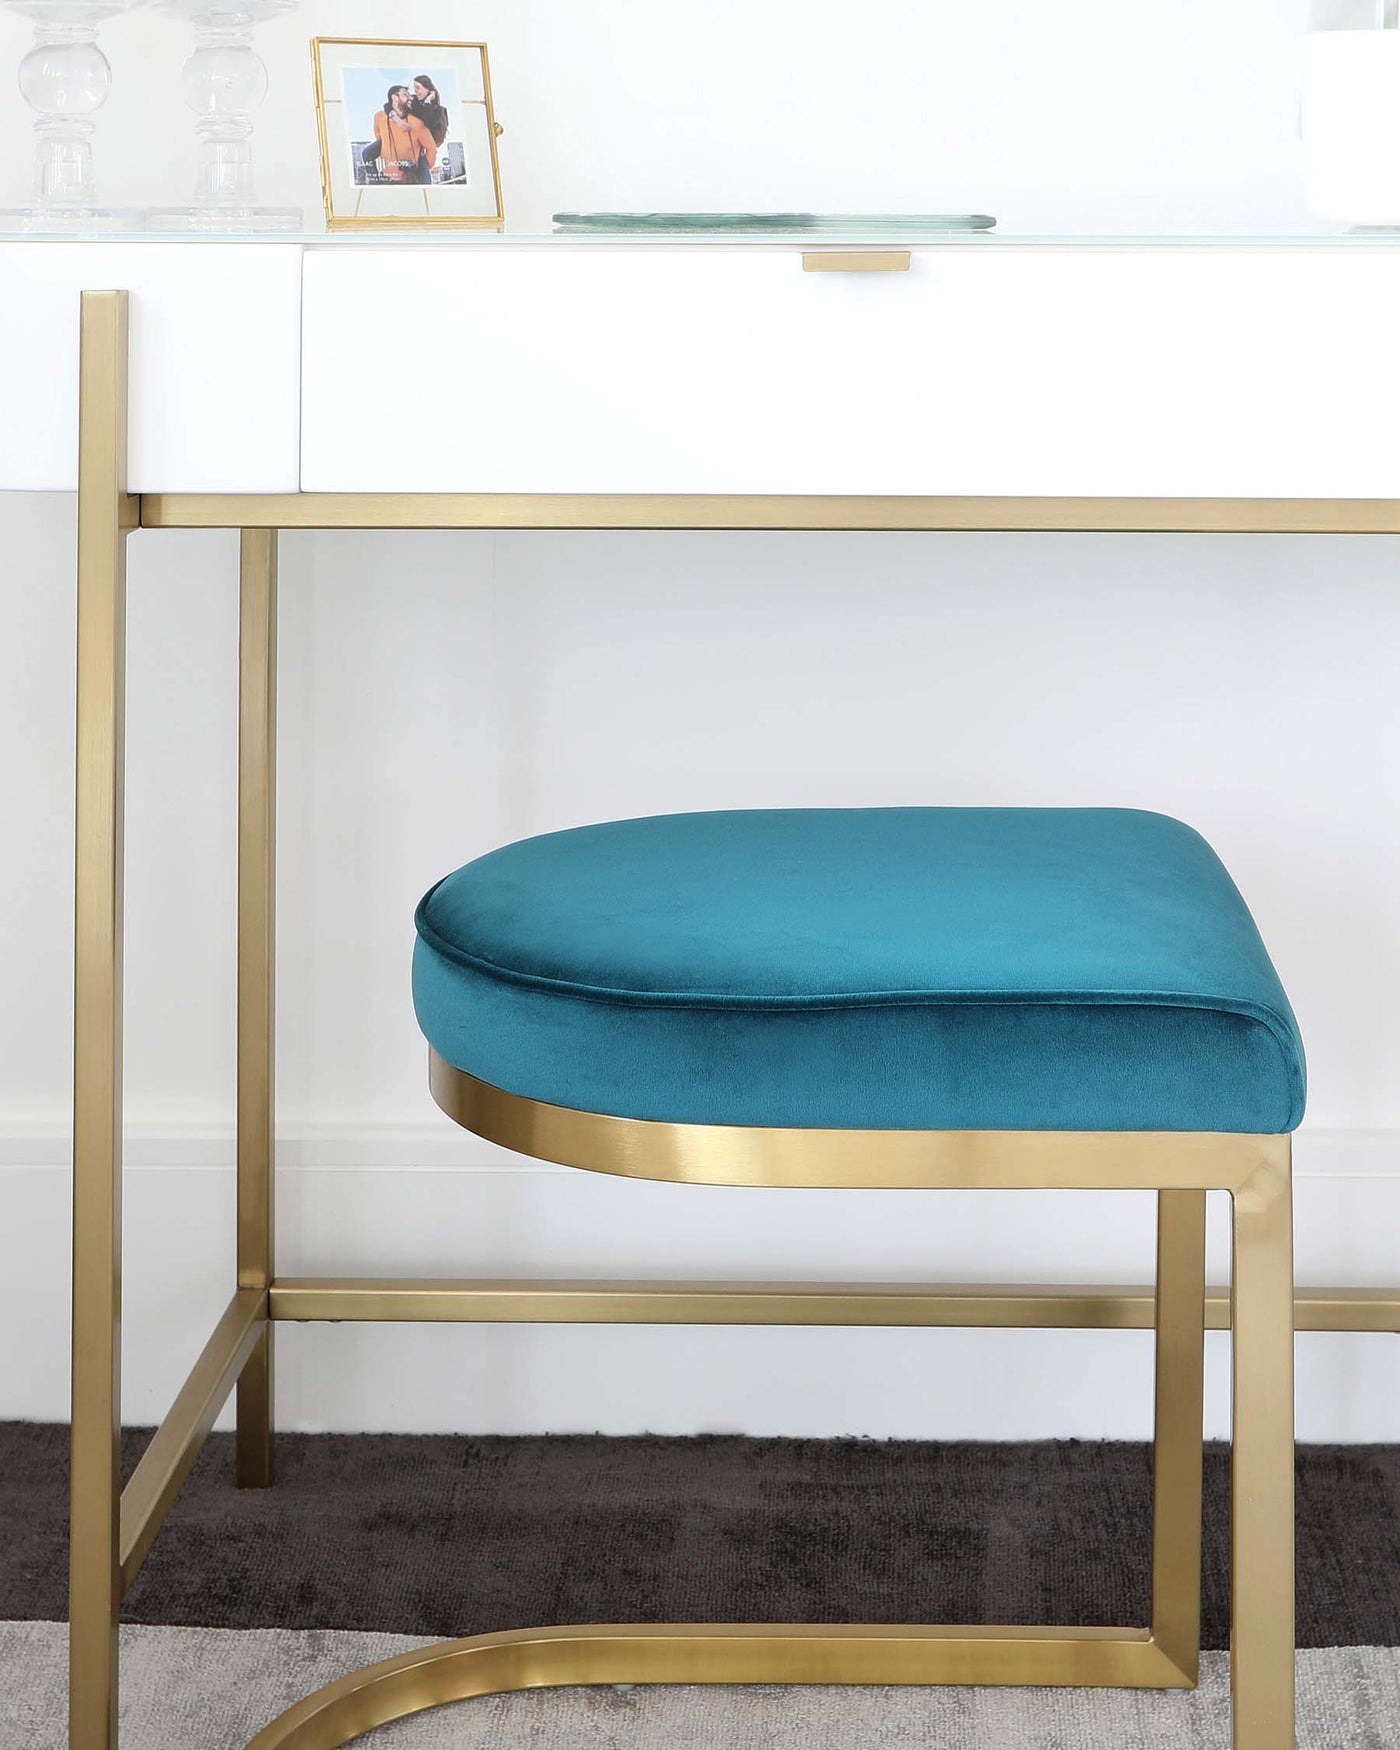 Elegant modern furniture featuring a white minimalist desk with a sleek golden frame and a plush teal velvet ottoman with a matching golden base.